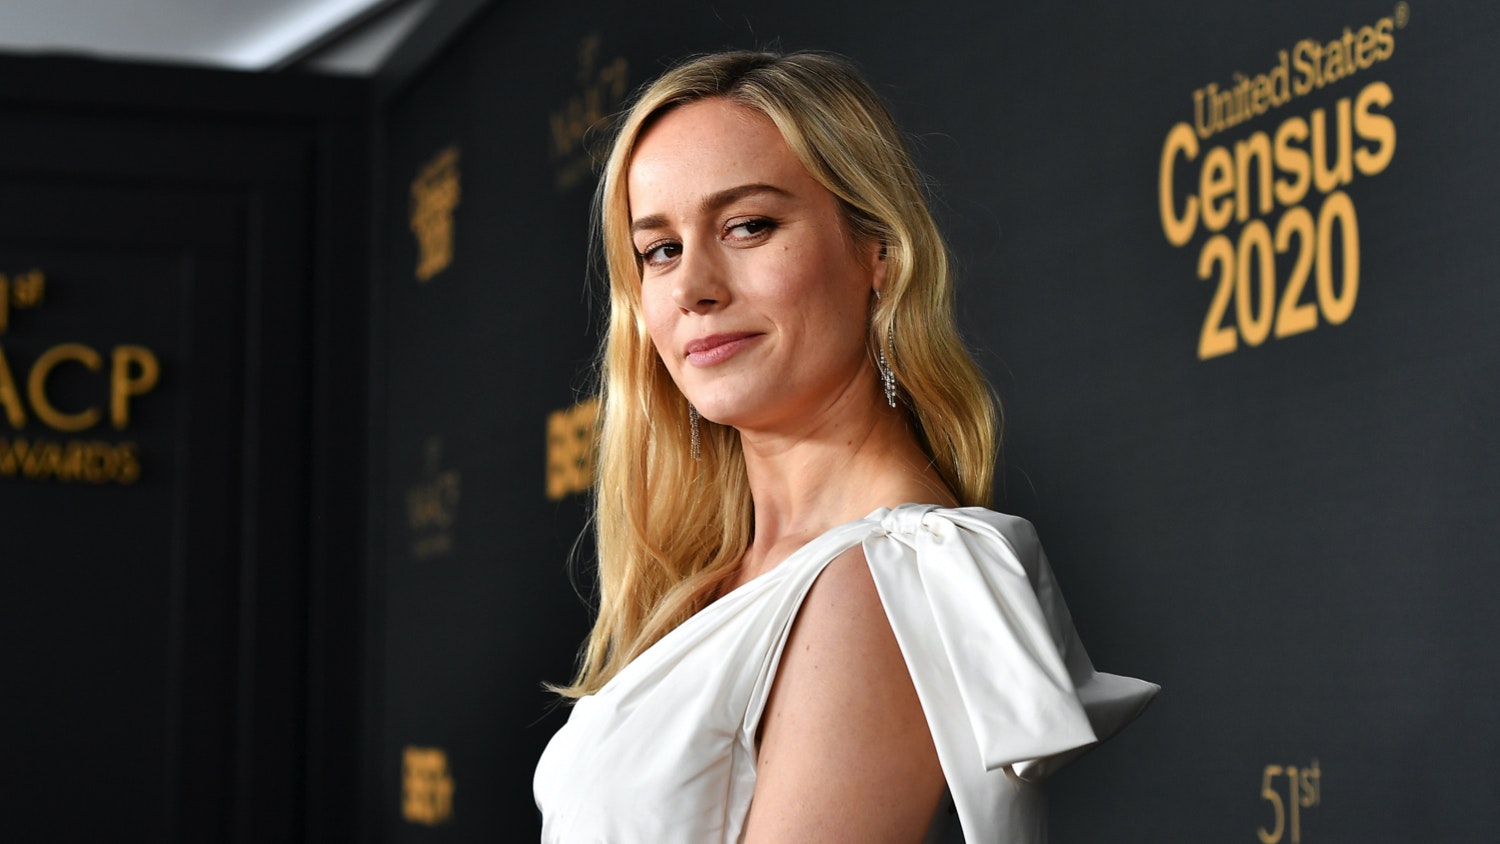 Brie Larson Is Added To 'Fast and Furious 10' - Knight Edge Media